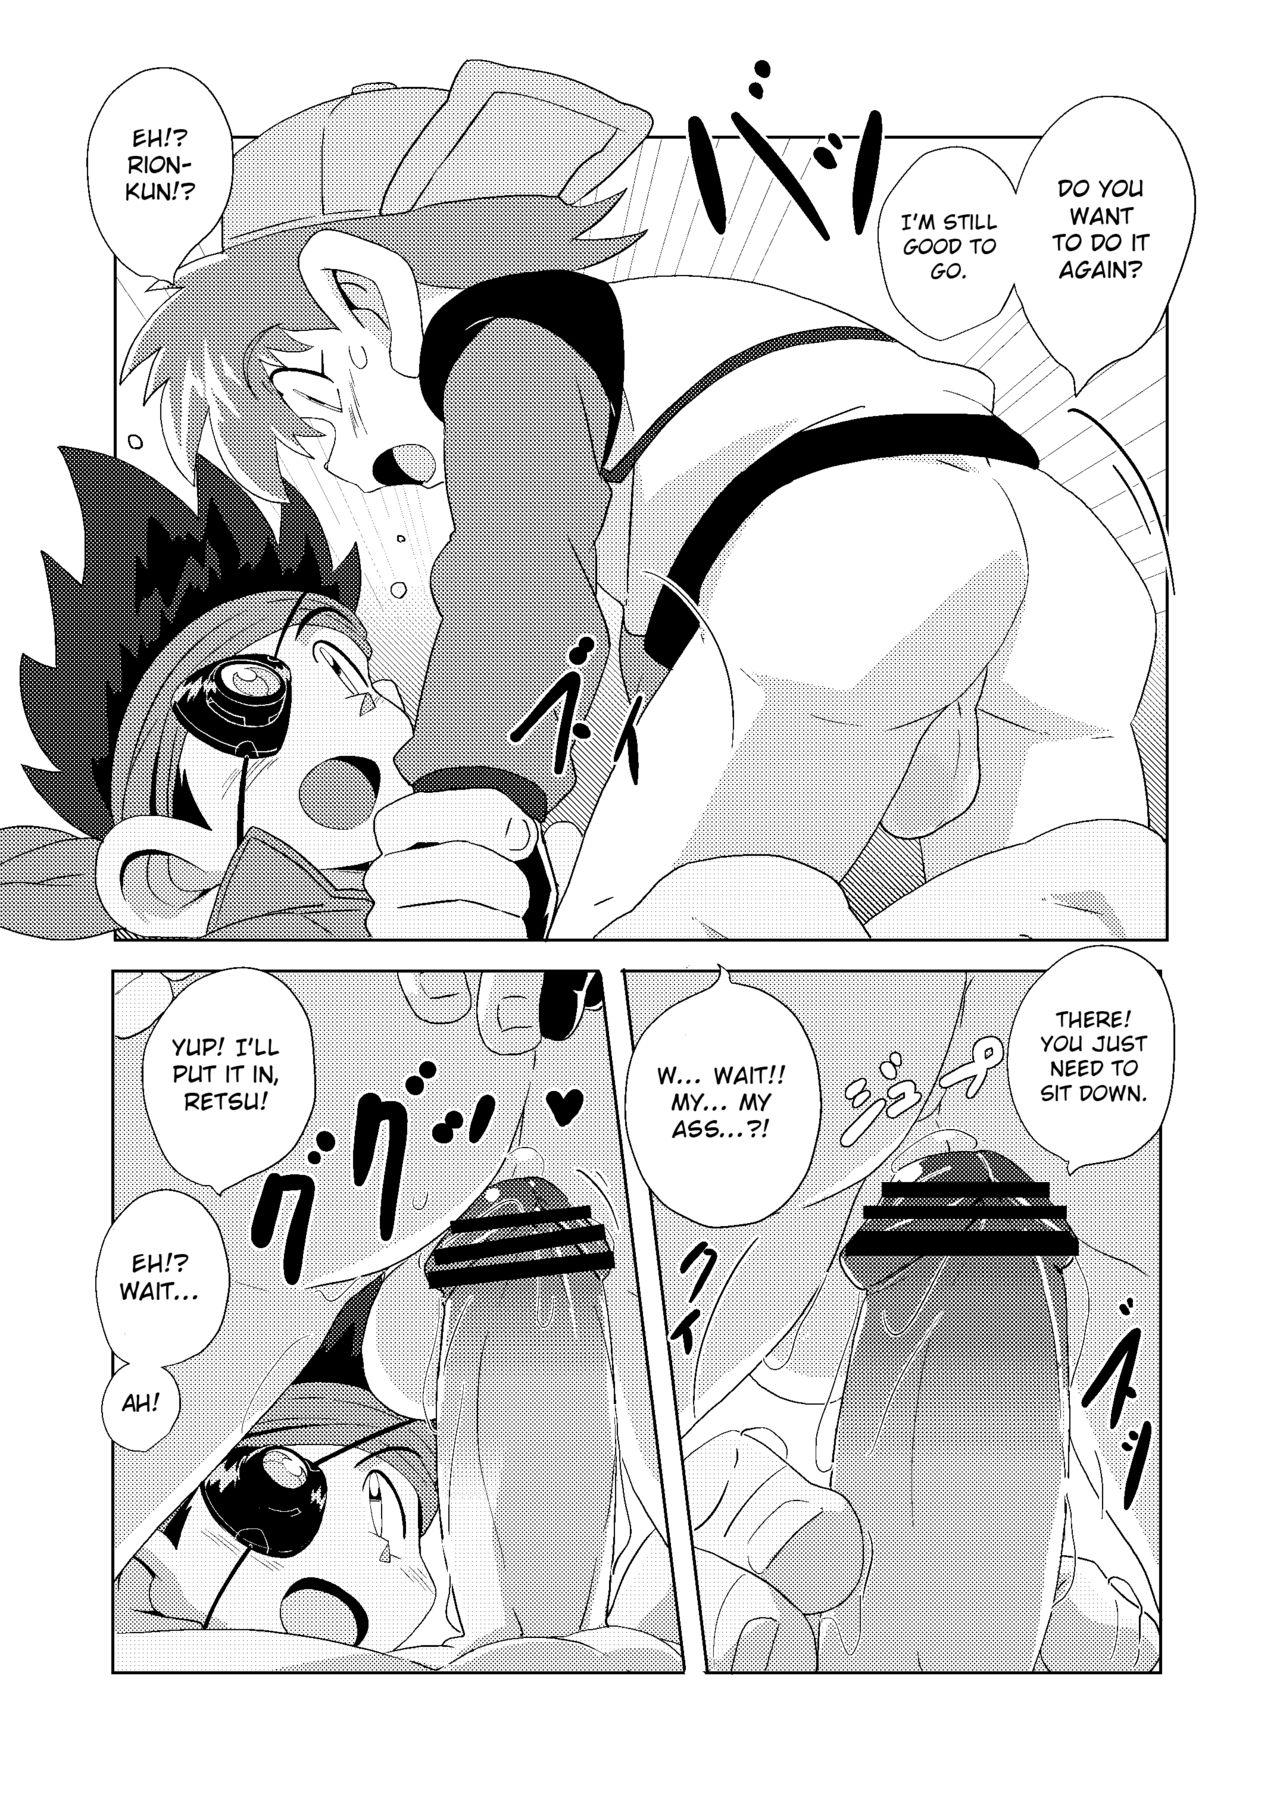 Hard Sex Chase the Wind - Bakusou kyoudai lets and go Maid - Page 10